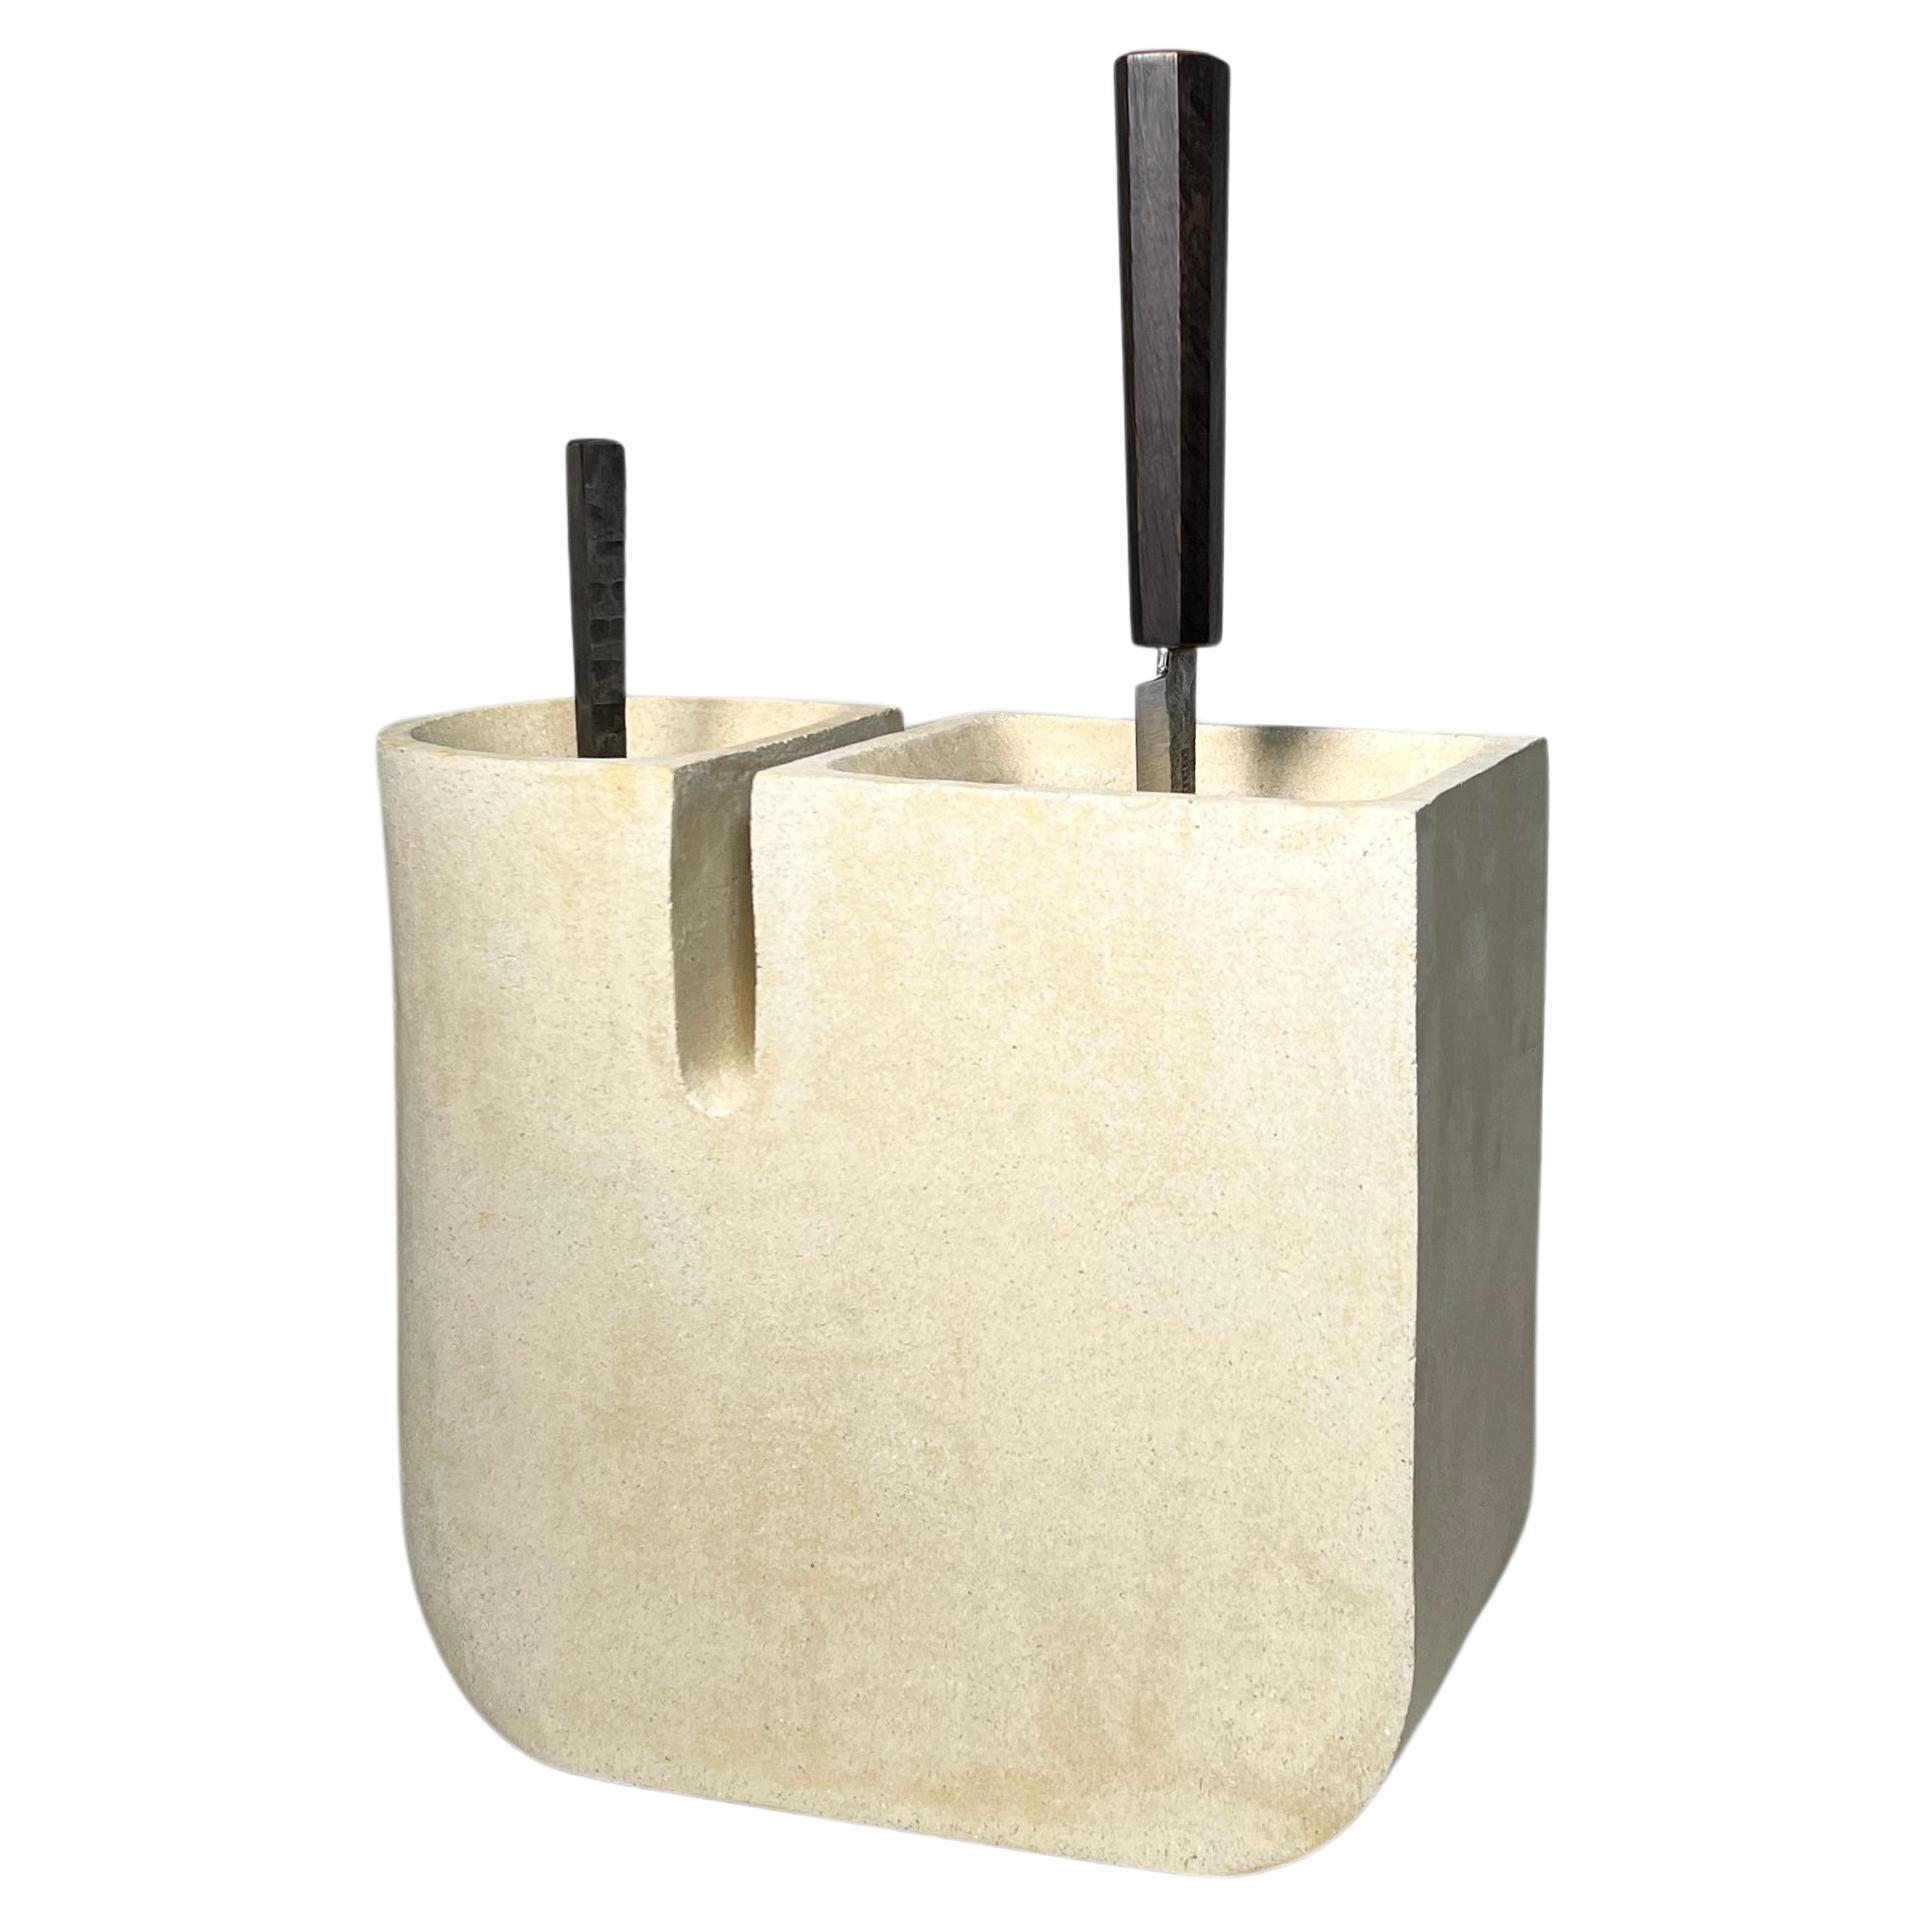 Media Knife Block in Ceramic with Glaze Options Available by Piscina